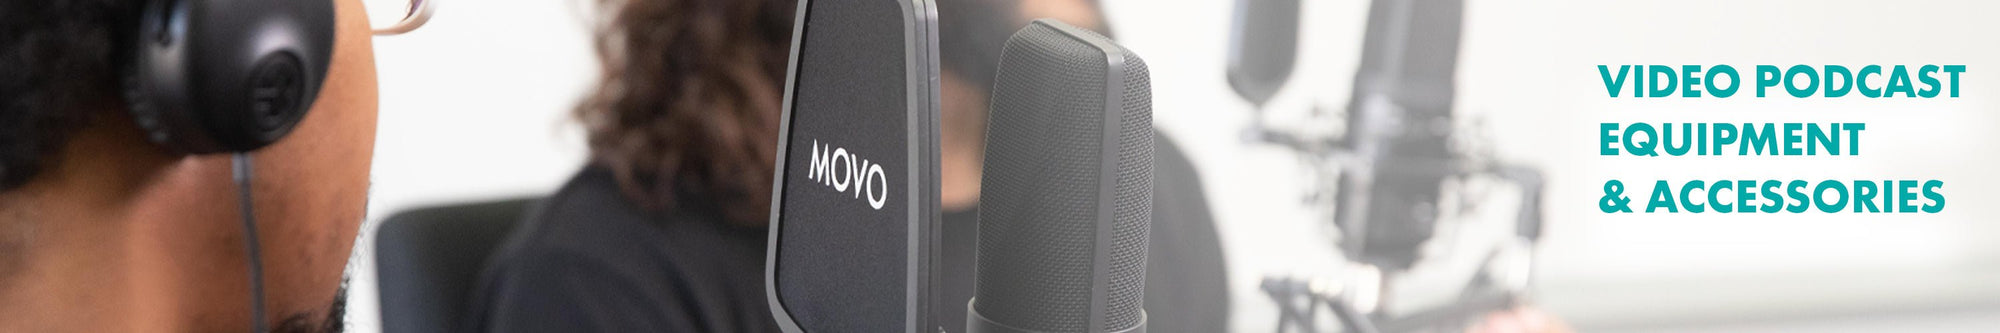 Video Podcast Equipment & Accessories - Movo